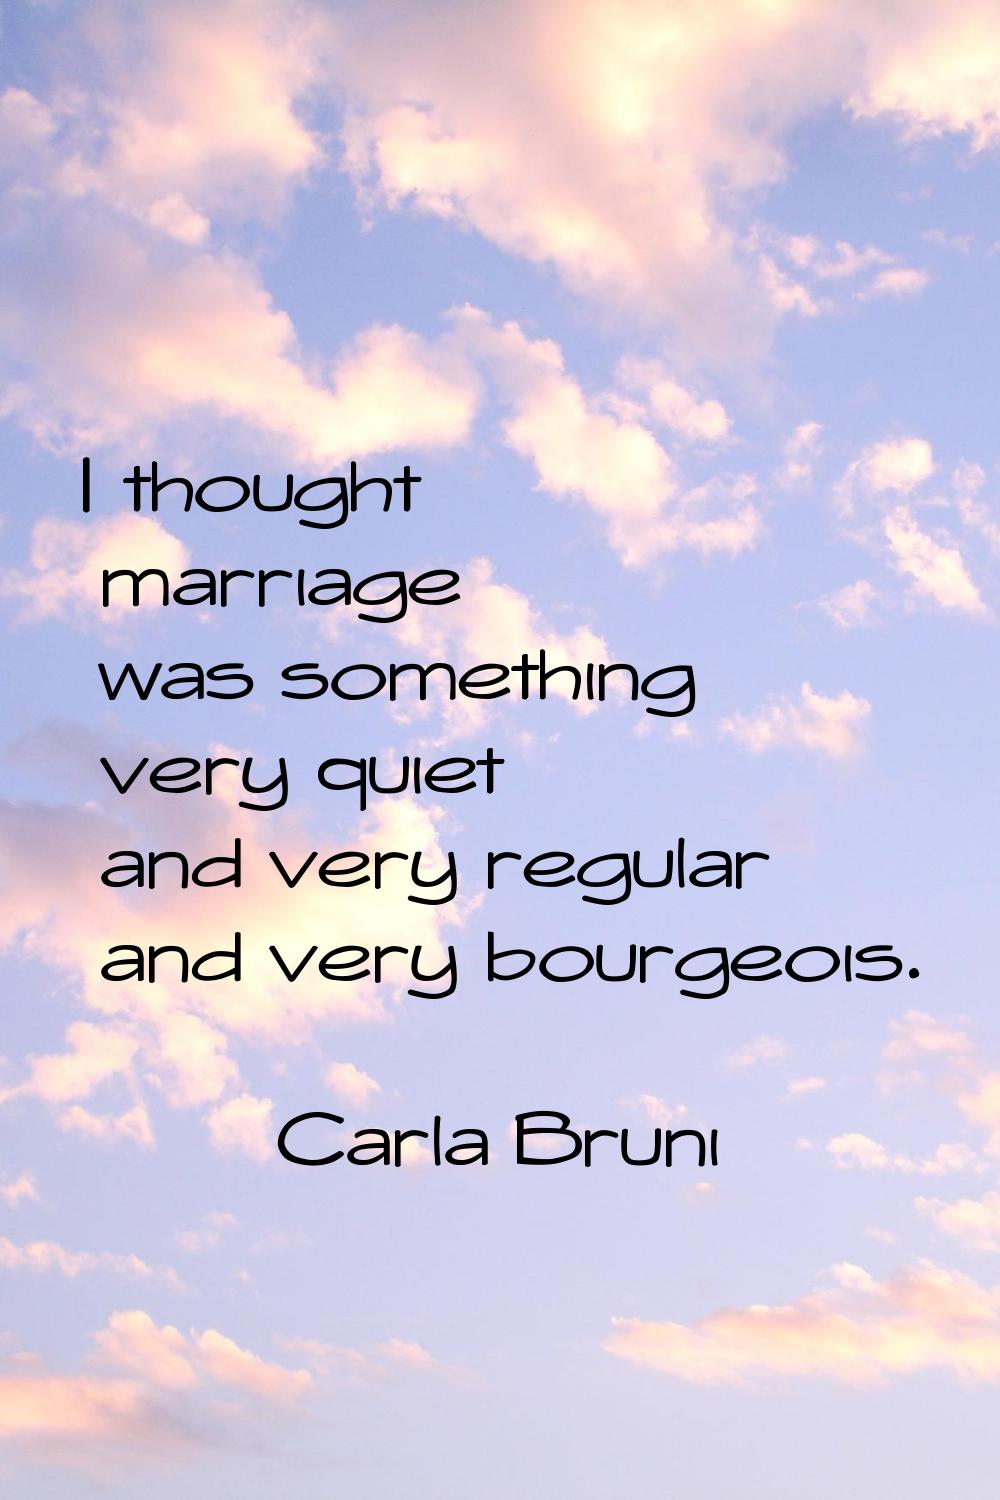 I thought marriage was something very quiet and very regular and very bourgeois.